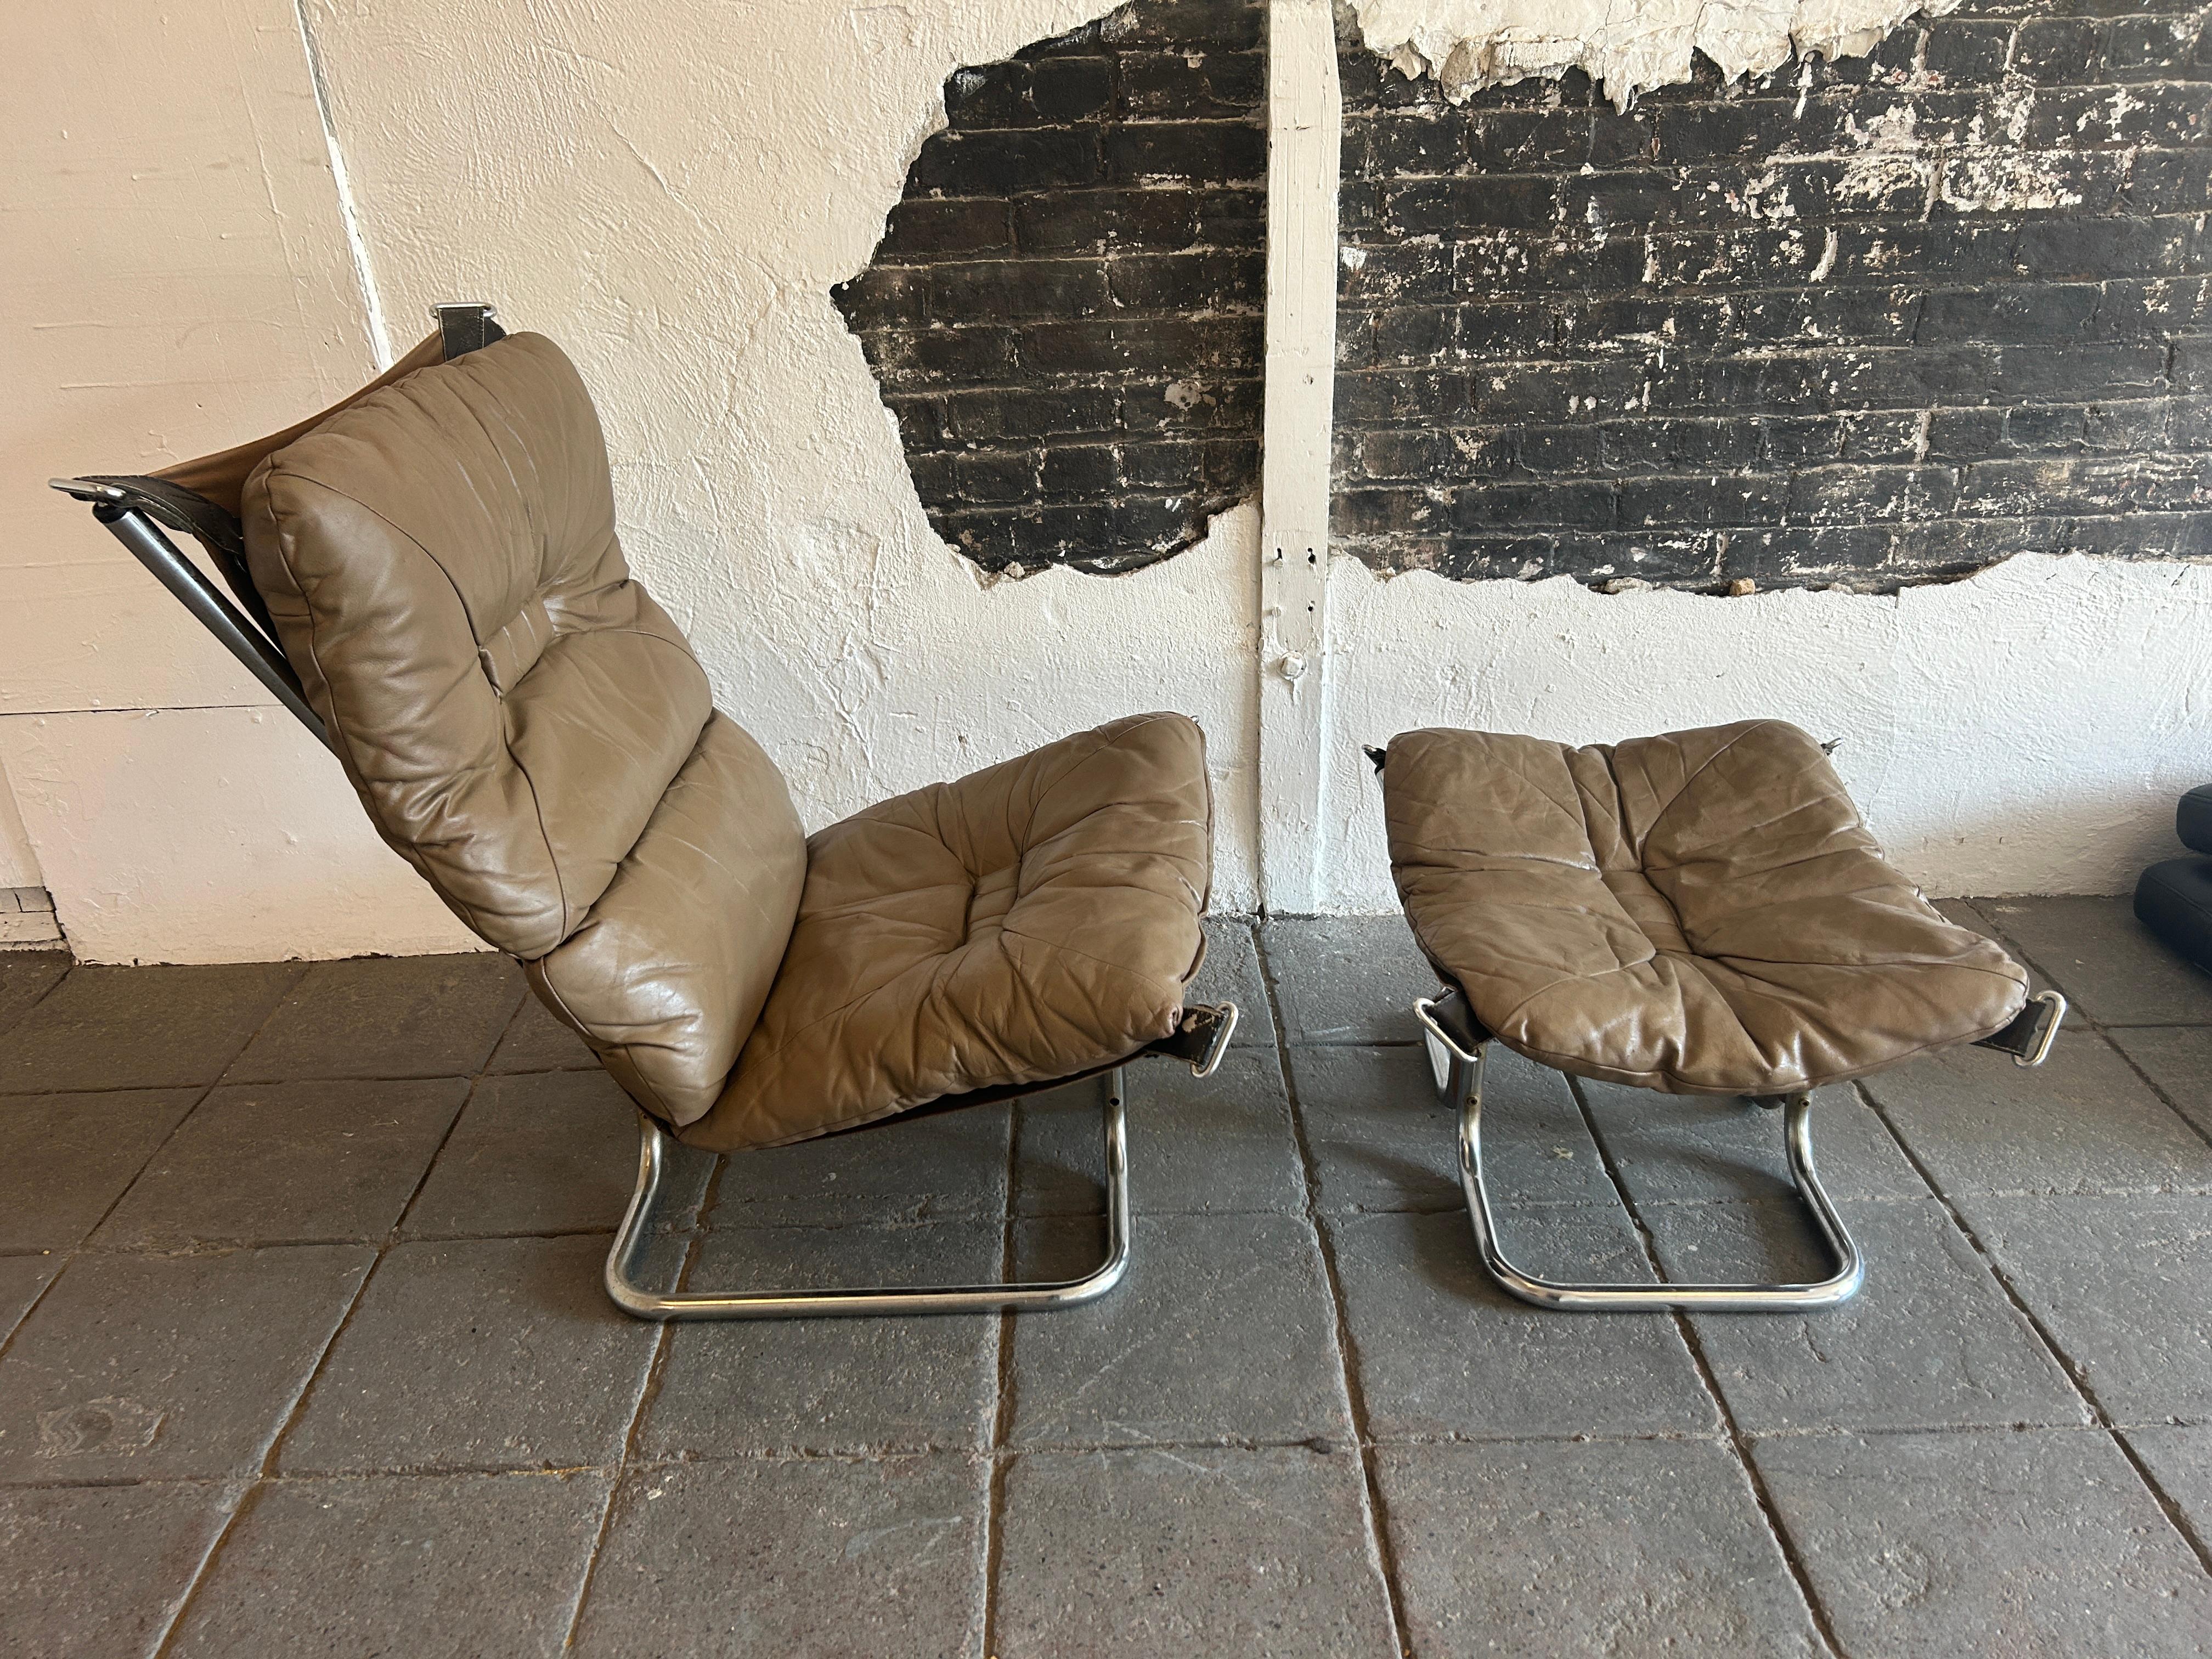 Midcentury Leather chrome round tube lounge chair and ottoman by Sigurd Ressell. Falcon Chair and ottoman. Leather is distressed and broken in - Shows signs of wear. All straps are in good shape and canvas is tight. Canvas is good on chair and the